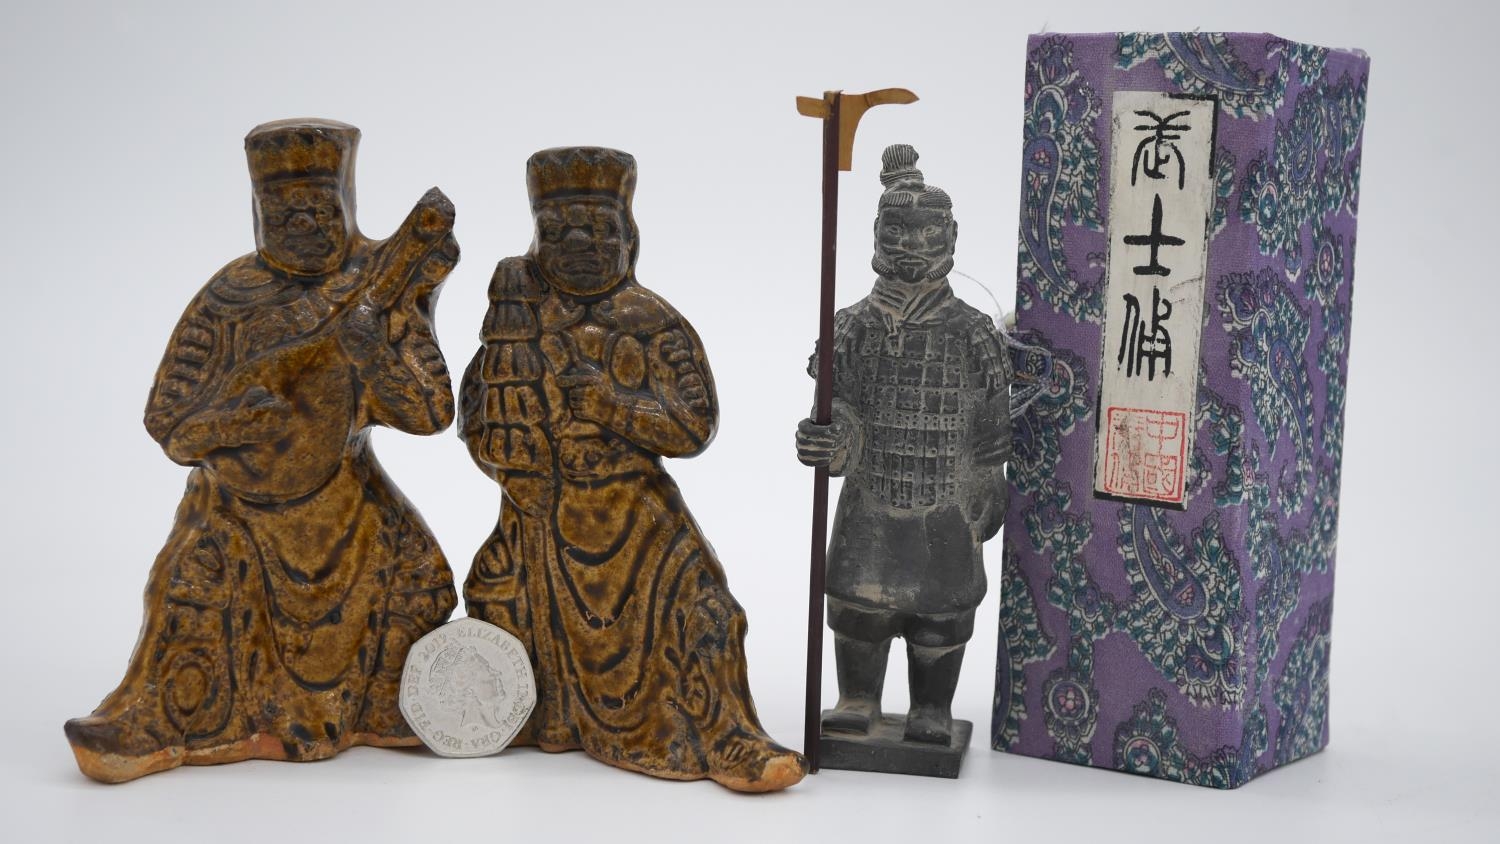 A pair of Tang style salt glaze ceramic tomb attendants, one playing an instrument along with a - Image 6 of 6